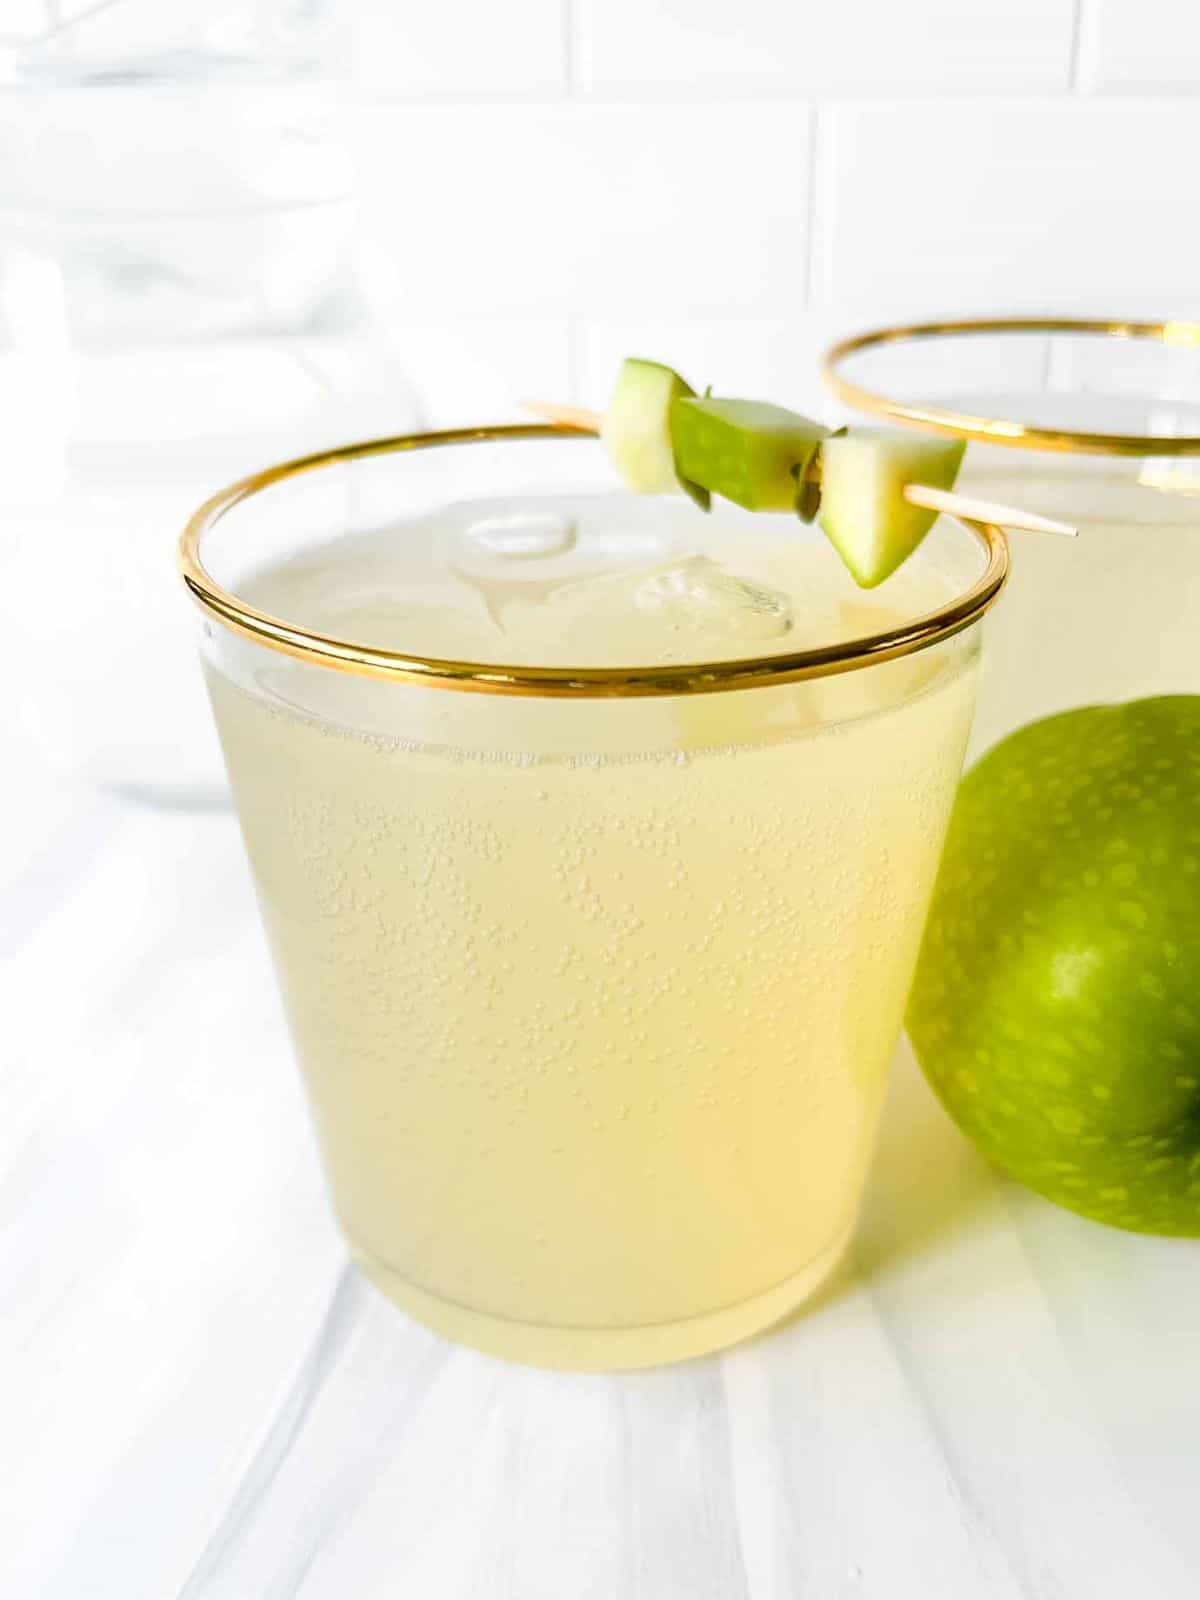 green apple mocktail in two glasses with gold rims next to a Granny smith apple.